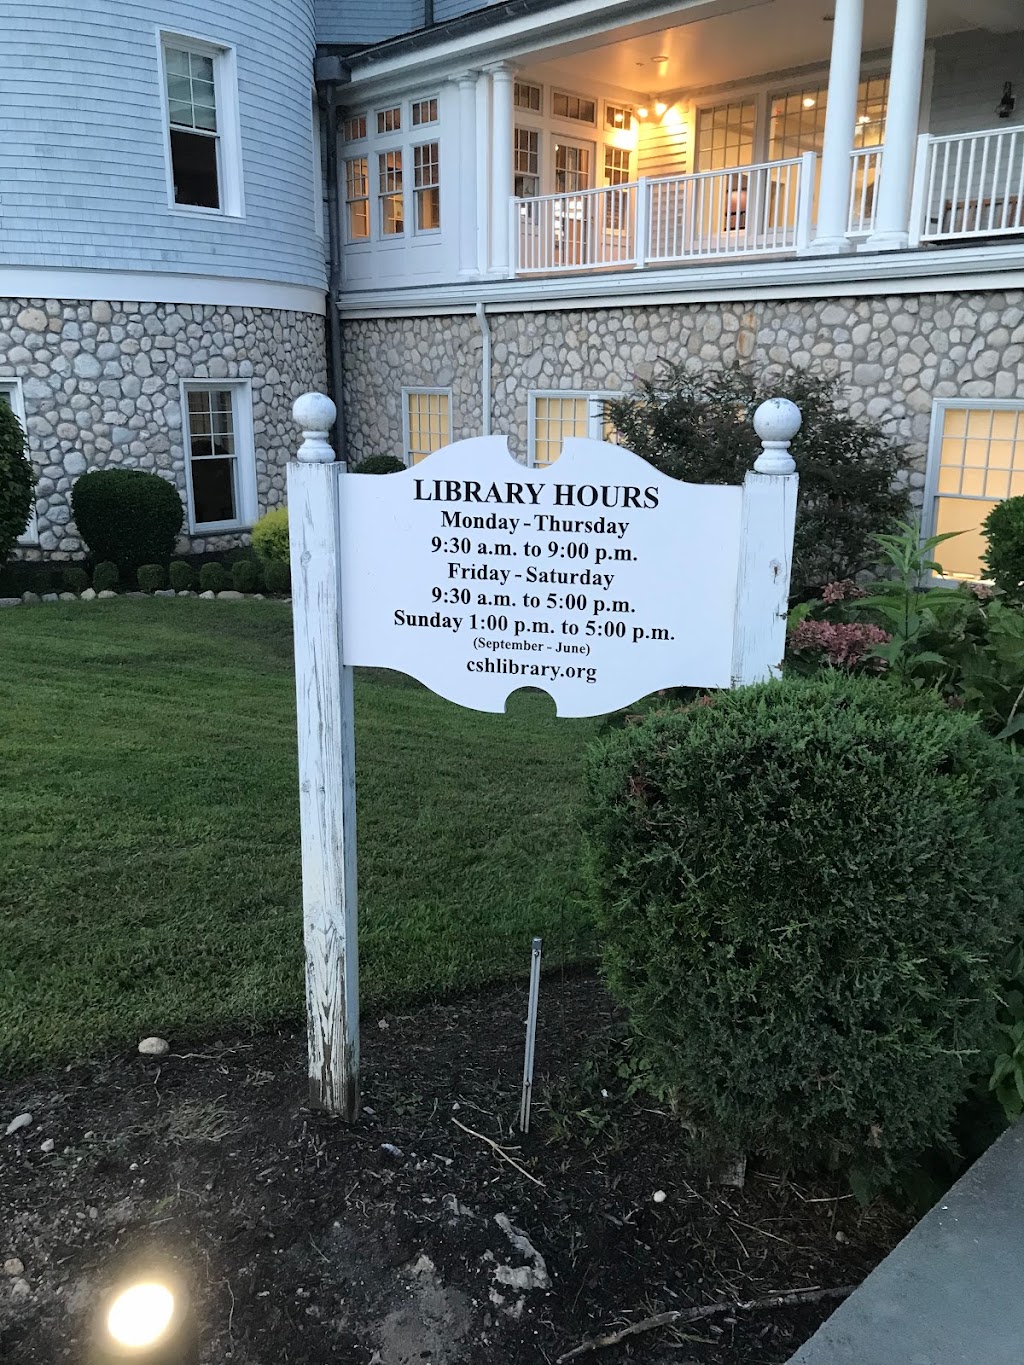 Cold Spring Harbor Library | 95 Harbor Rd, Cold Spring Harbor, NY 11724 | Phone: (631) 692-6820